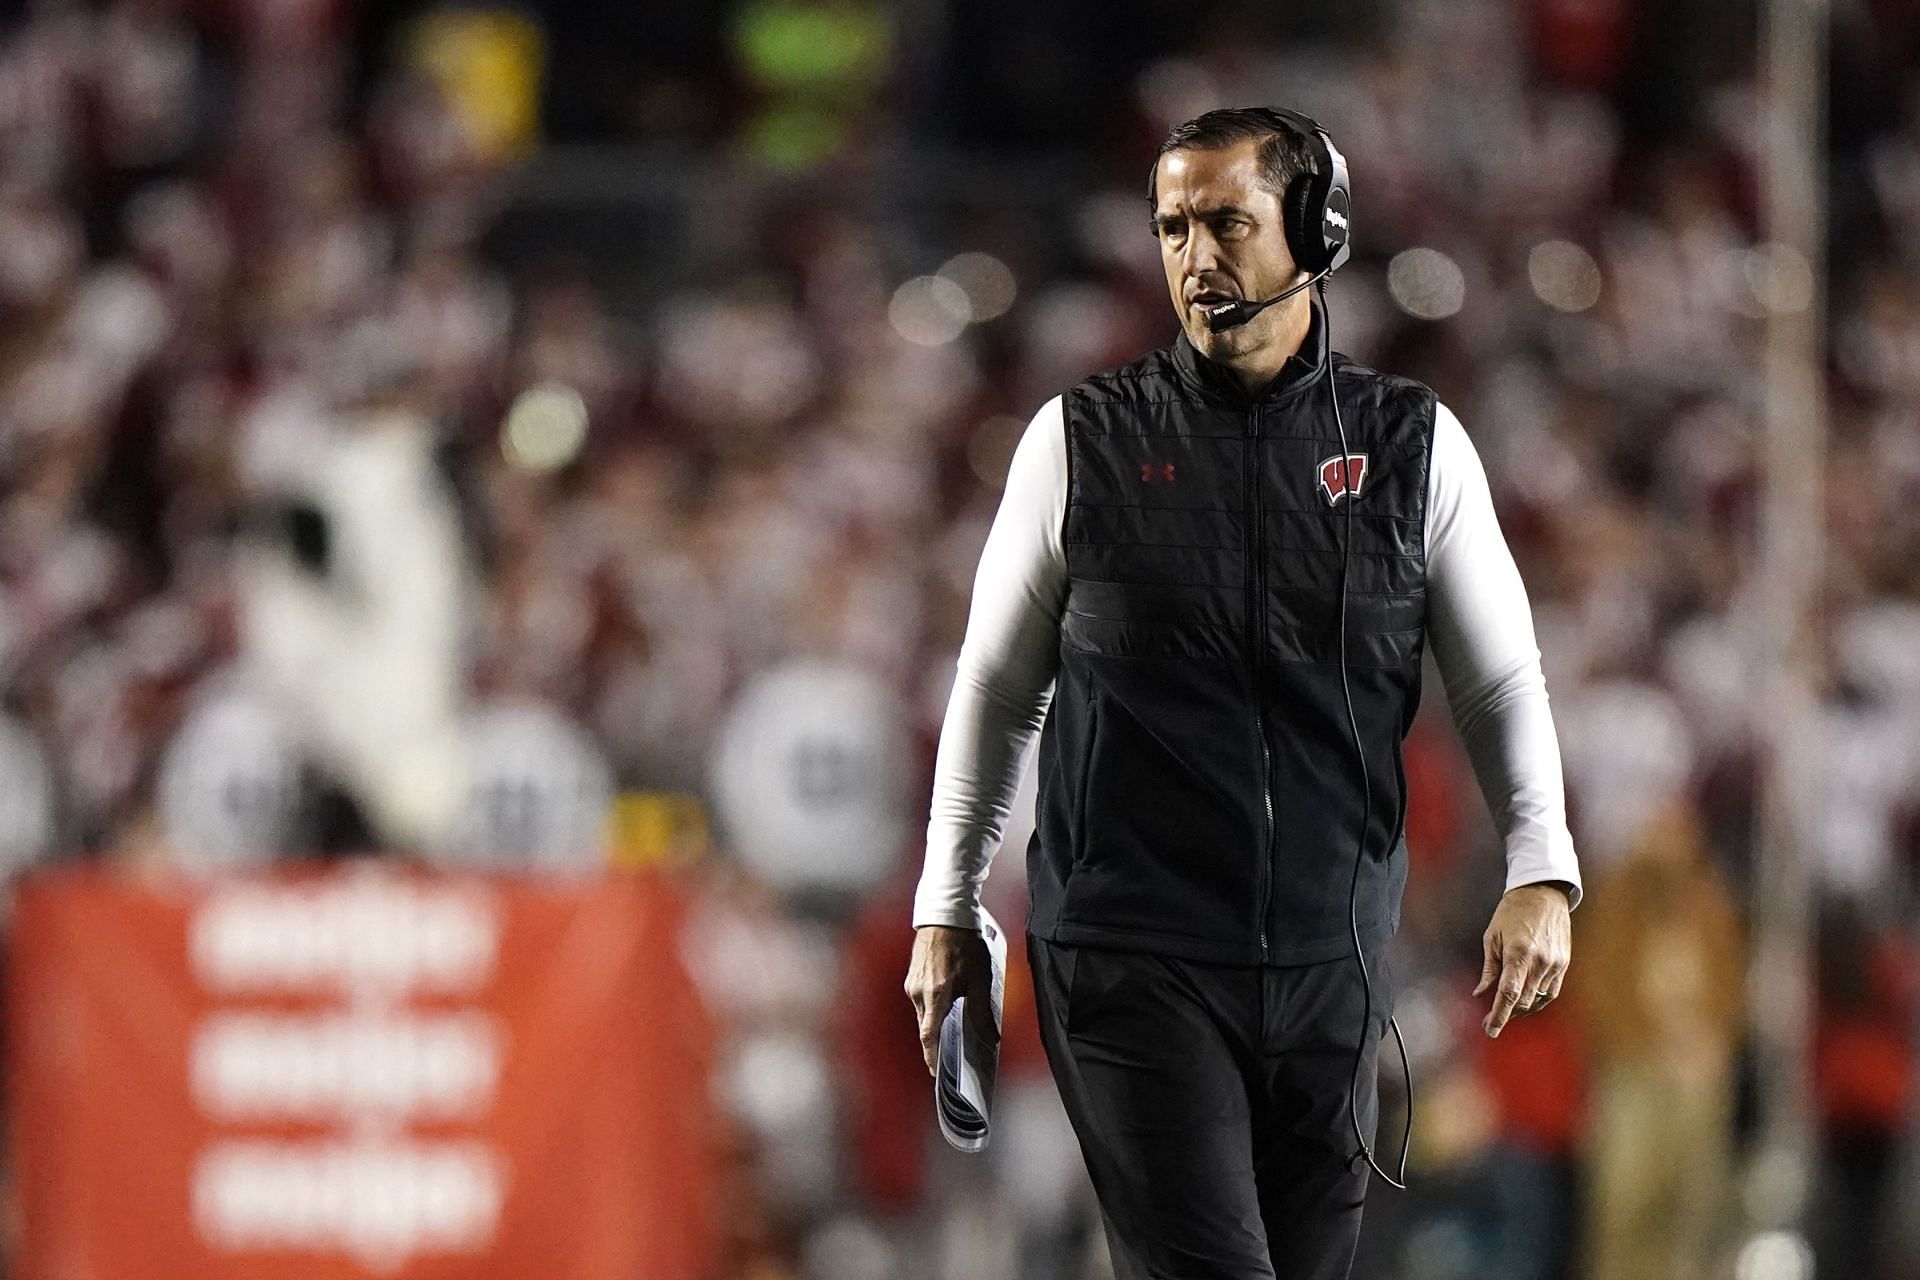 Nebraska Wisconsin Football: Wisconsin head coach Luke Fickell walks back to the sideline after a timeout during the first half of an NCAA college football game against Nebraska, Saturday, Nov. 18, 2023, in Madison, Wis. (AP Photo/Aaron Gash)